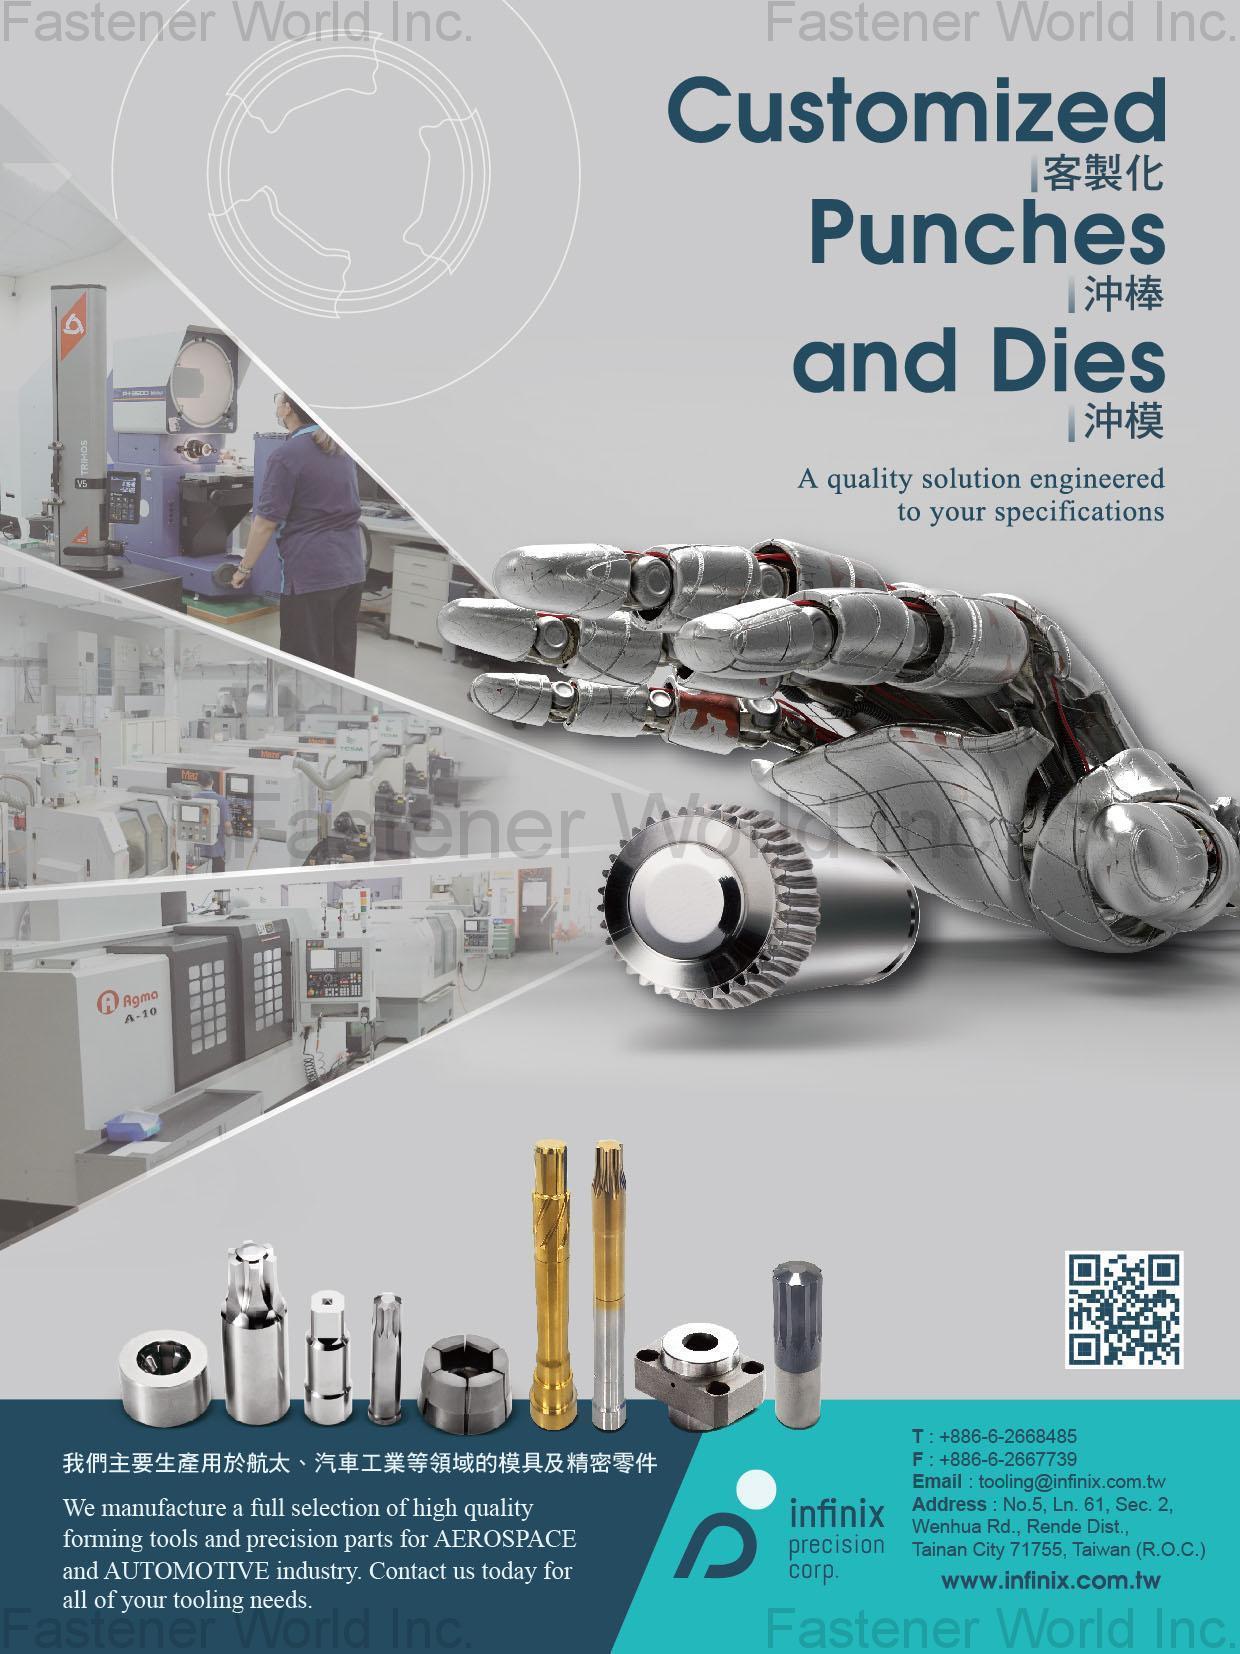 INFINIX PRECISION CORP. , Customized Punches and Dies , Punches